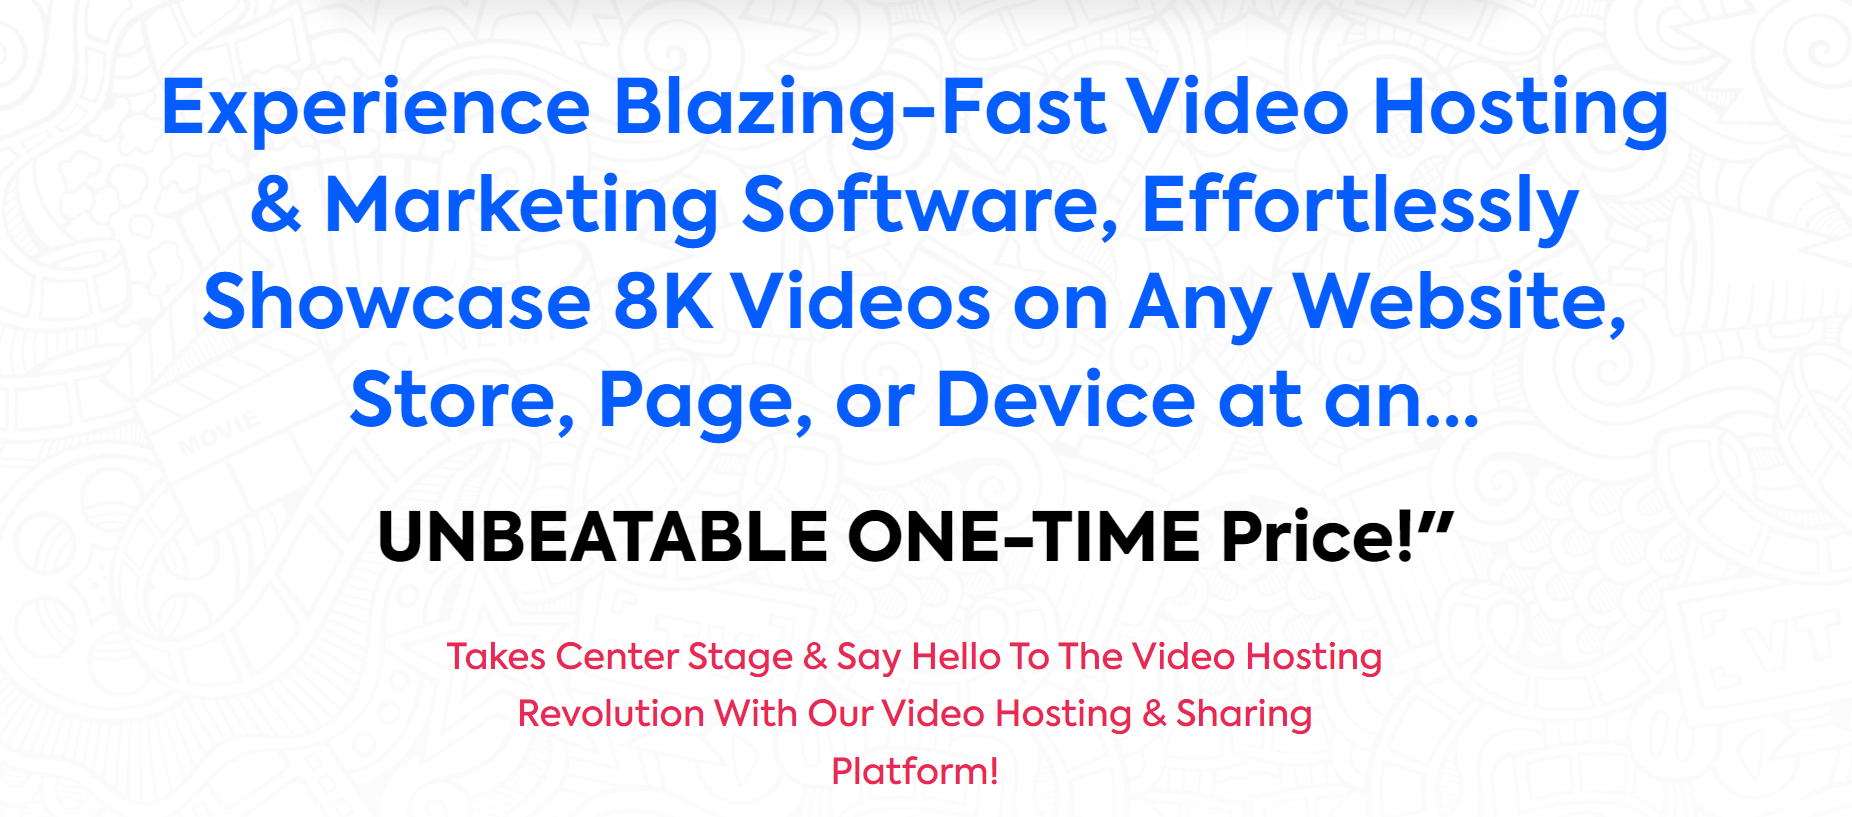 JVInvite VidVista VidVista Review - Experience Lightning-Fast Video Hosting and Marketing Software And Effortlessly Embed 8K Videos on Any Website, Store, Page, or Device at an Irresistible One-Time Cost!